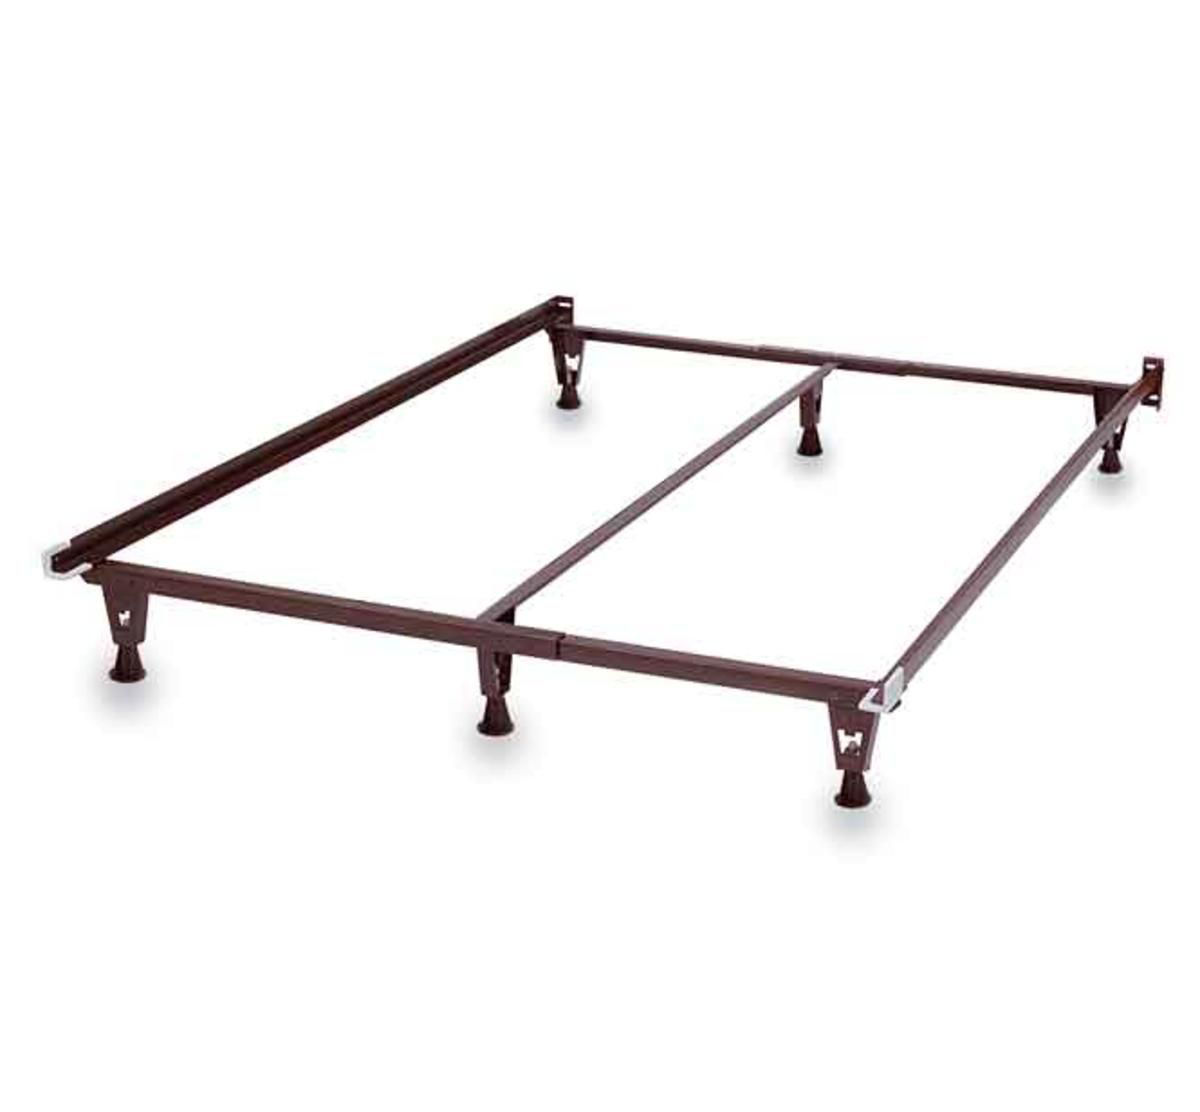 Full Queen Bed Frame Bad, Queen Bed Frame Nearby